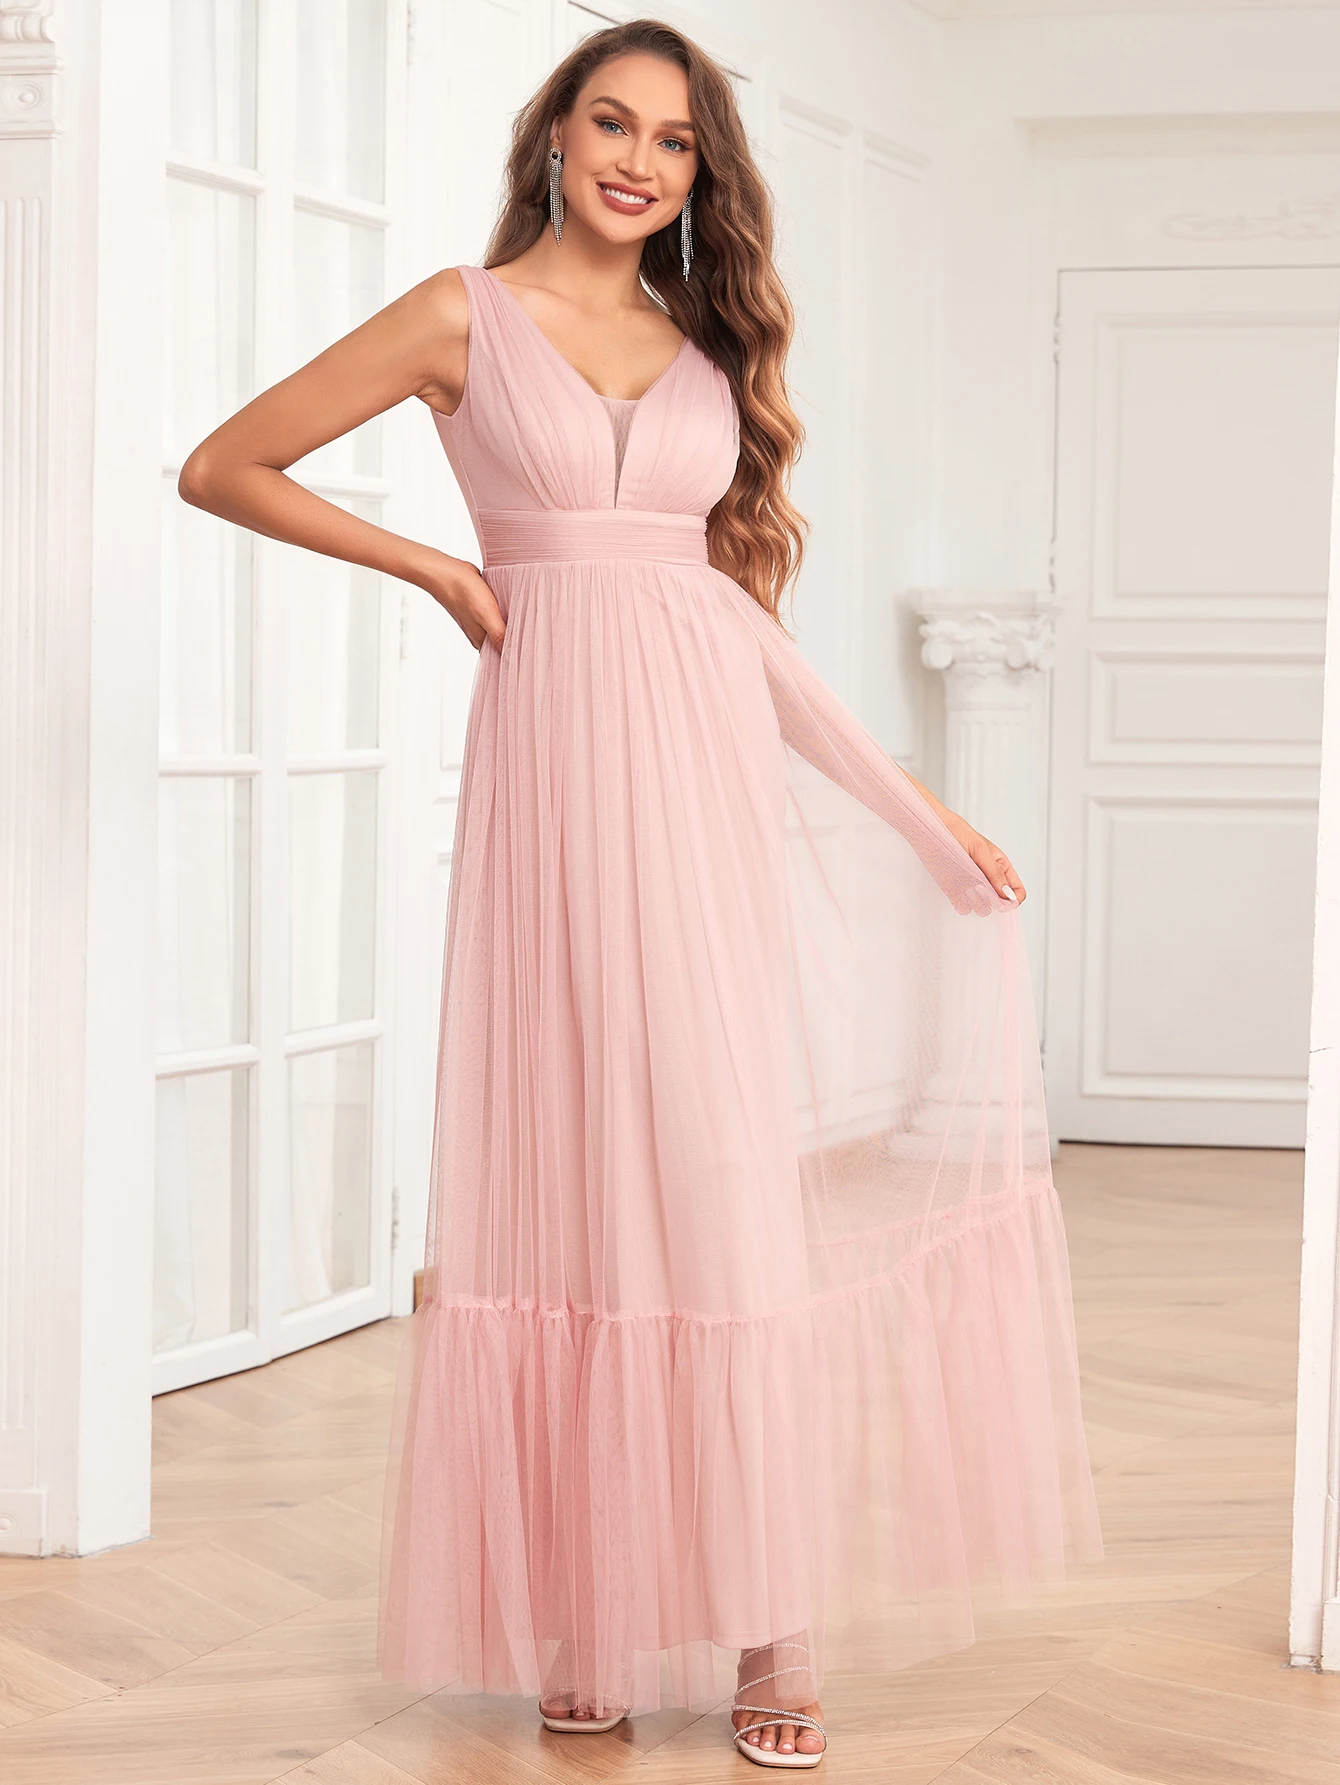 

Women's Elegant Double V Neck Sleeveless Tulle Fully Lined Evening Gown A-Line Fluffy Tulle Wedding Bridesmaid Party Cocktail